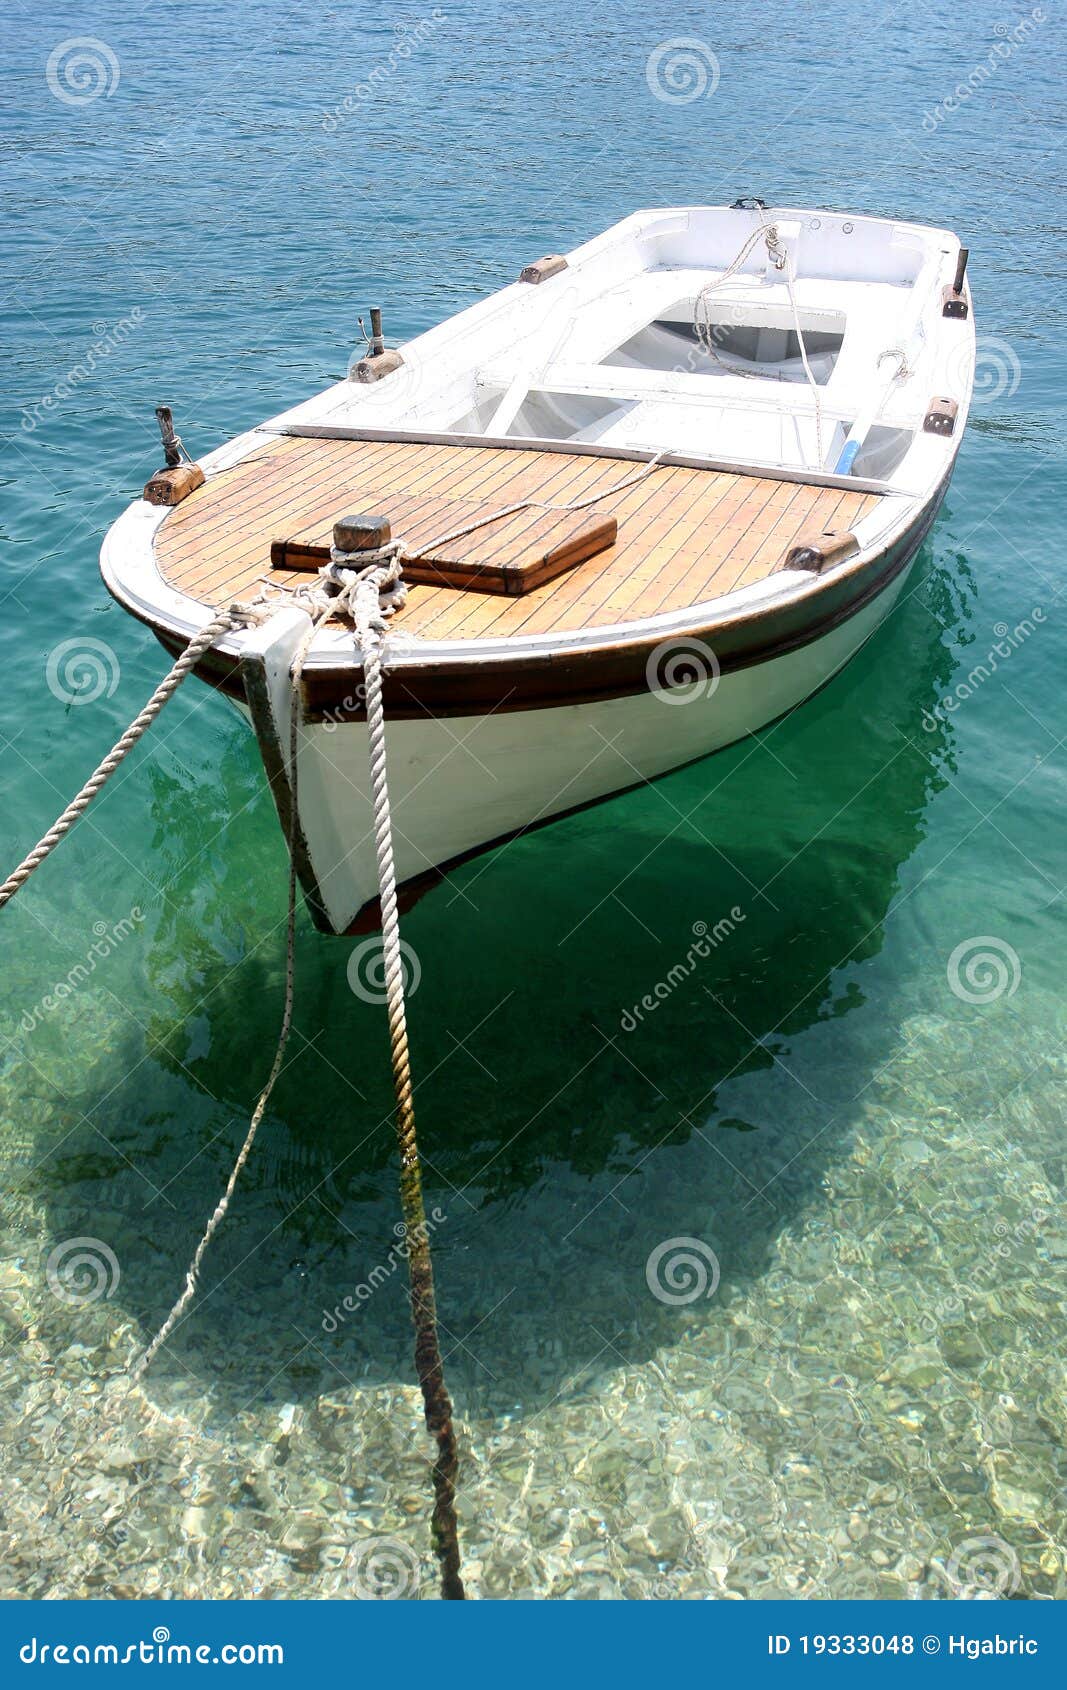 Small fishing boat stock photo. Image of wooden, region ...